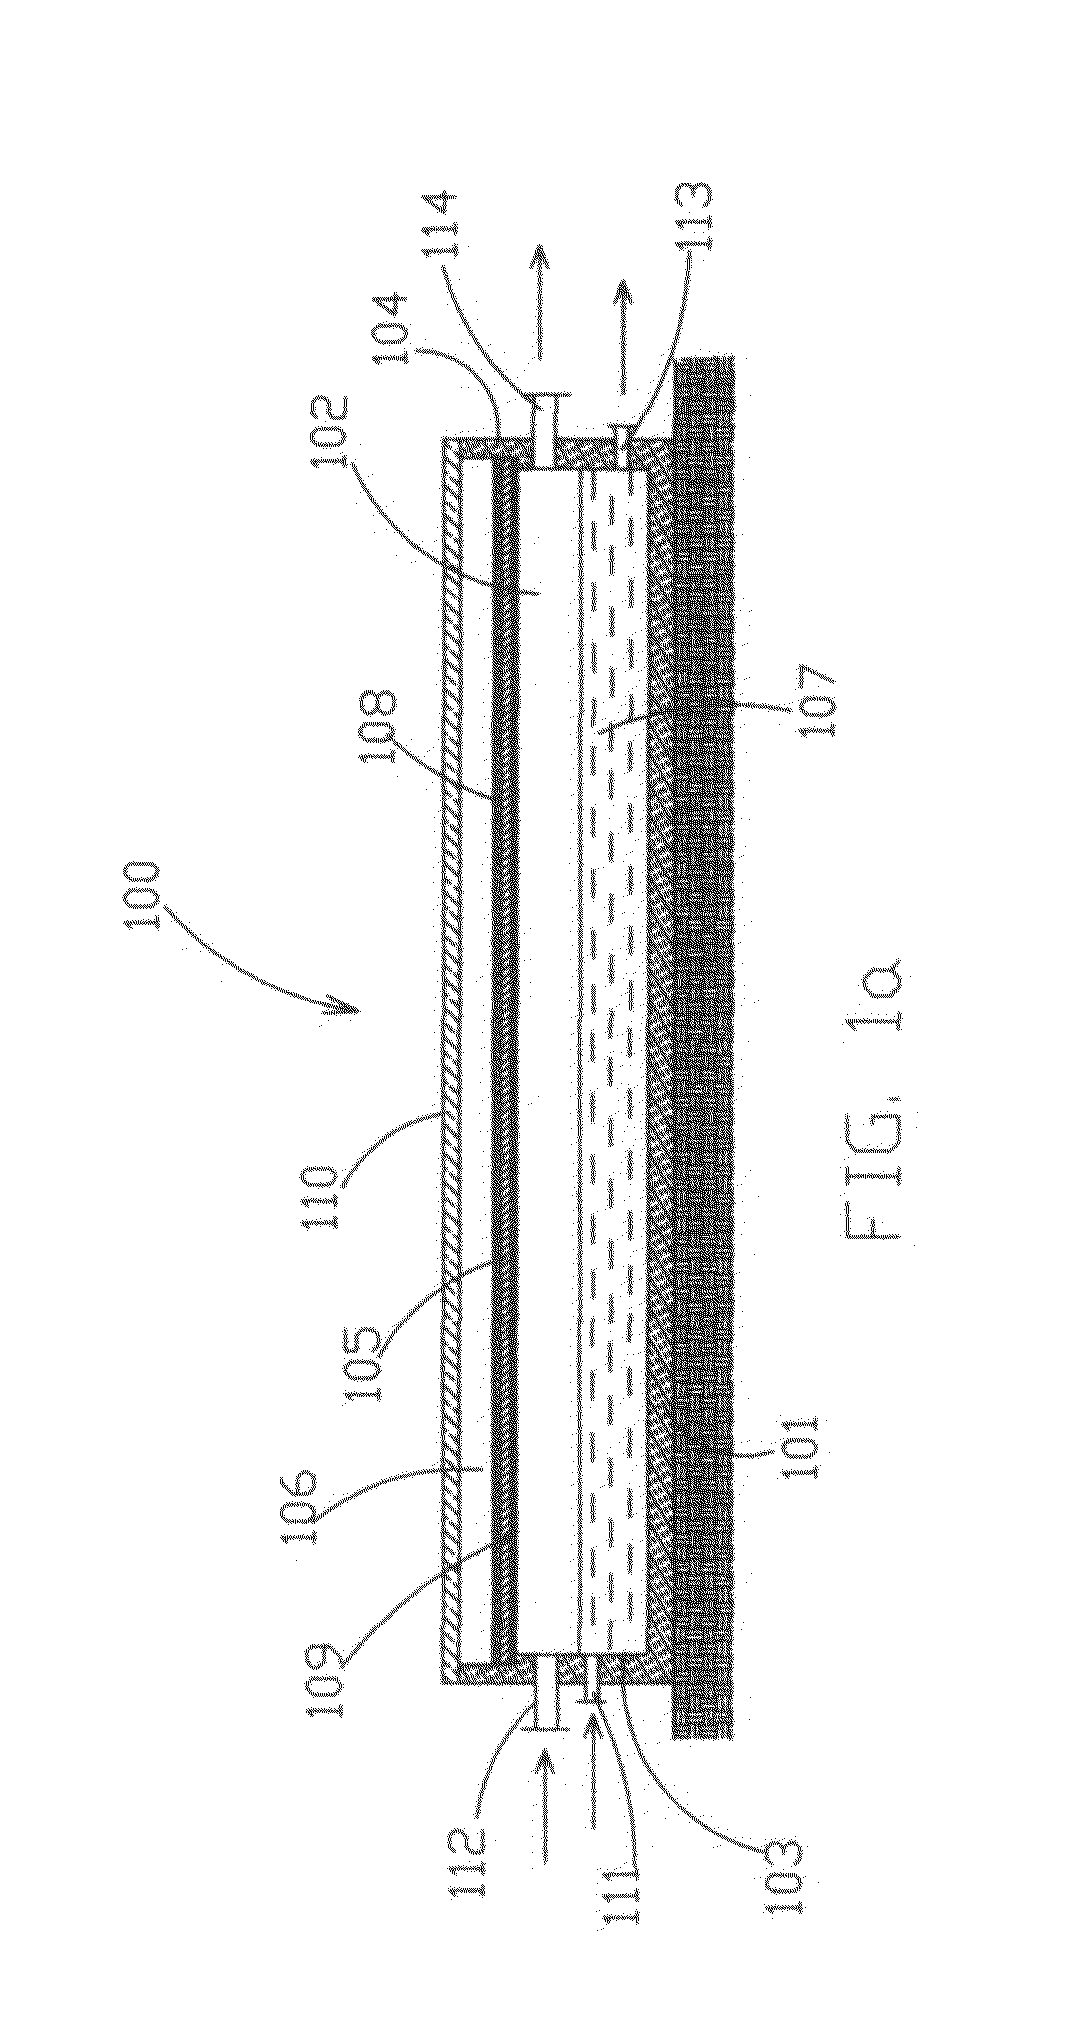 Solar collector for evaporation of aqueous solutions